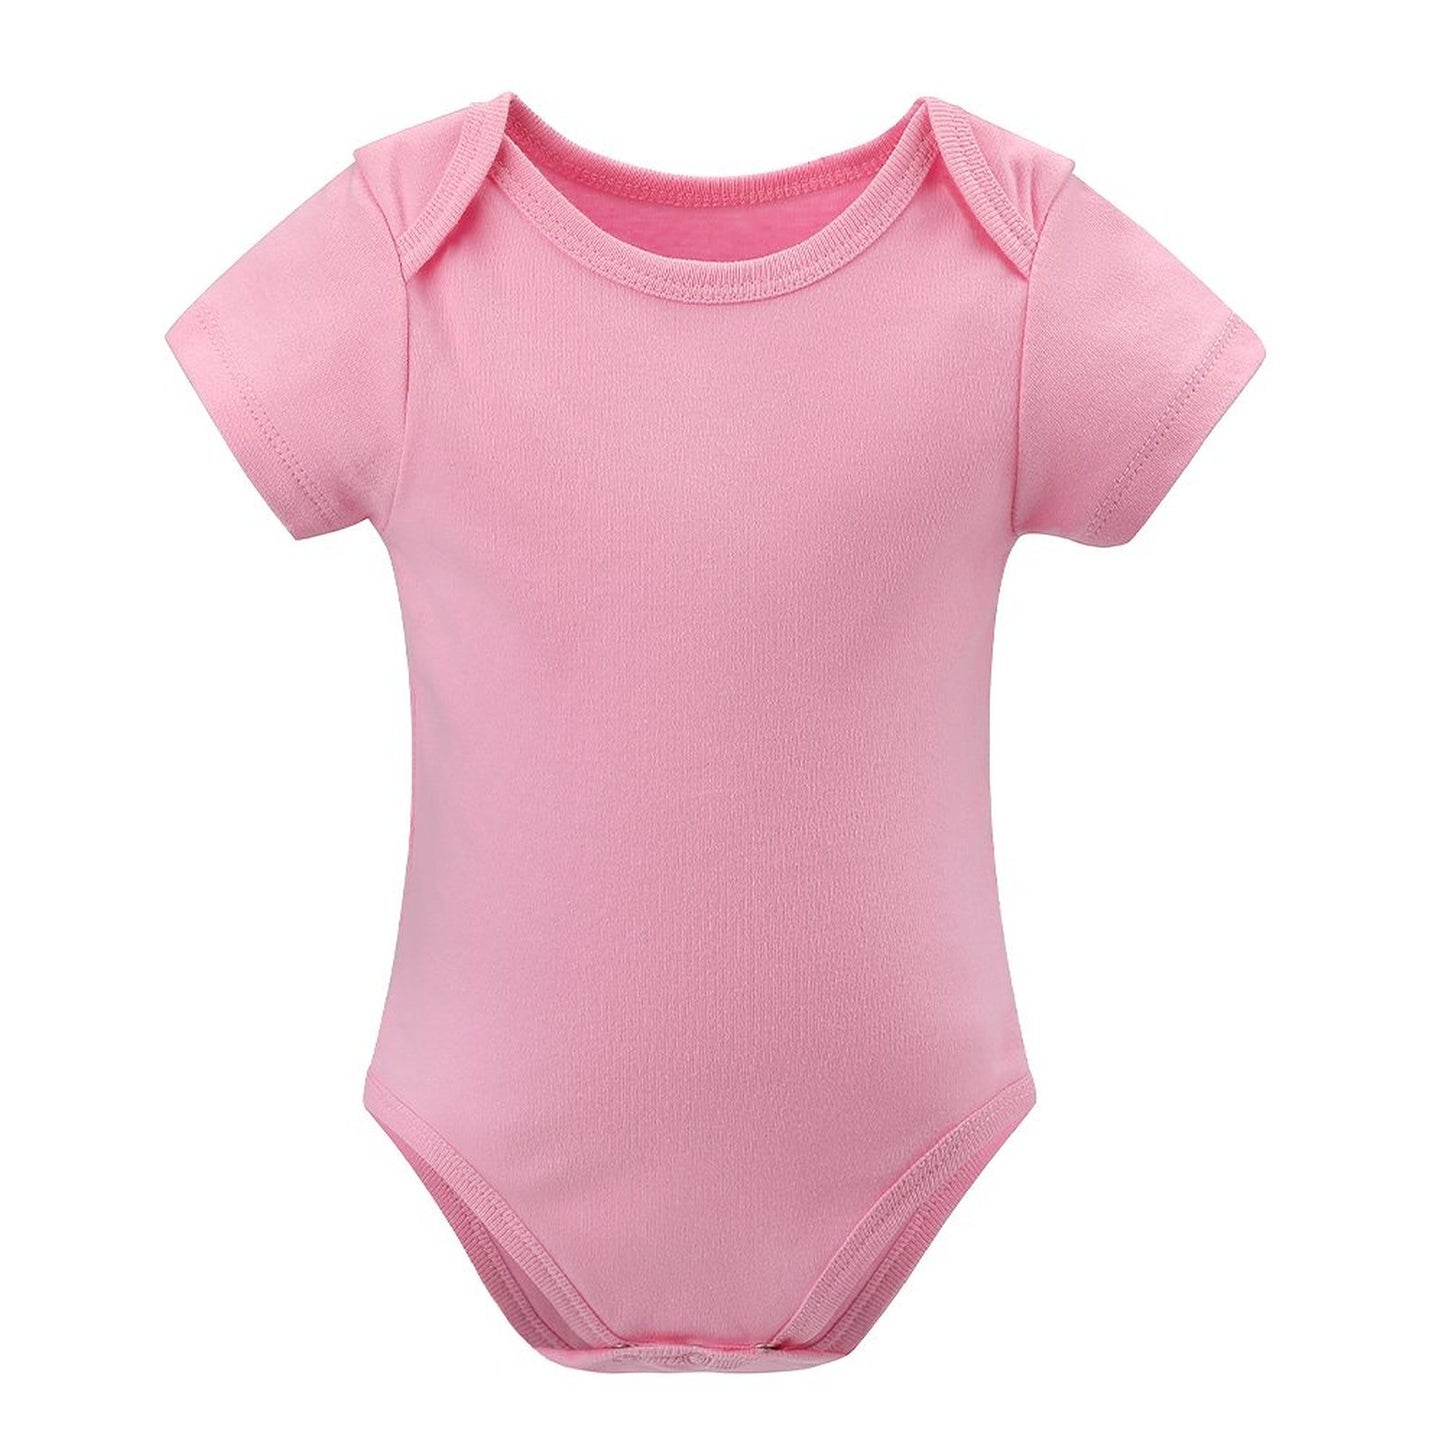 Personalize Your Own Short Sleeve Baby Romper Bodysuit